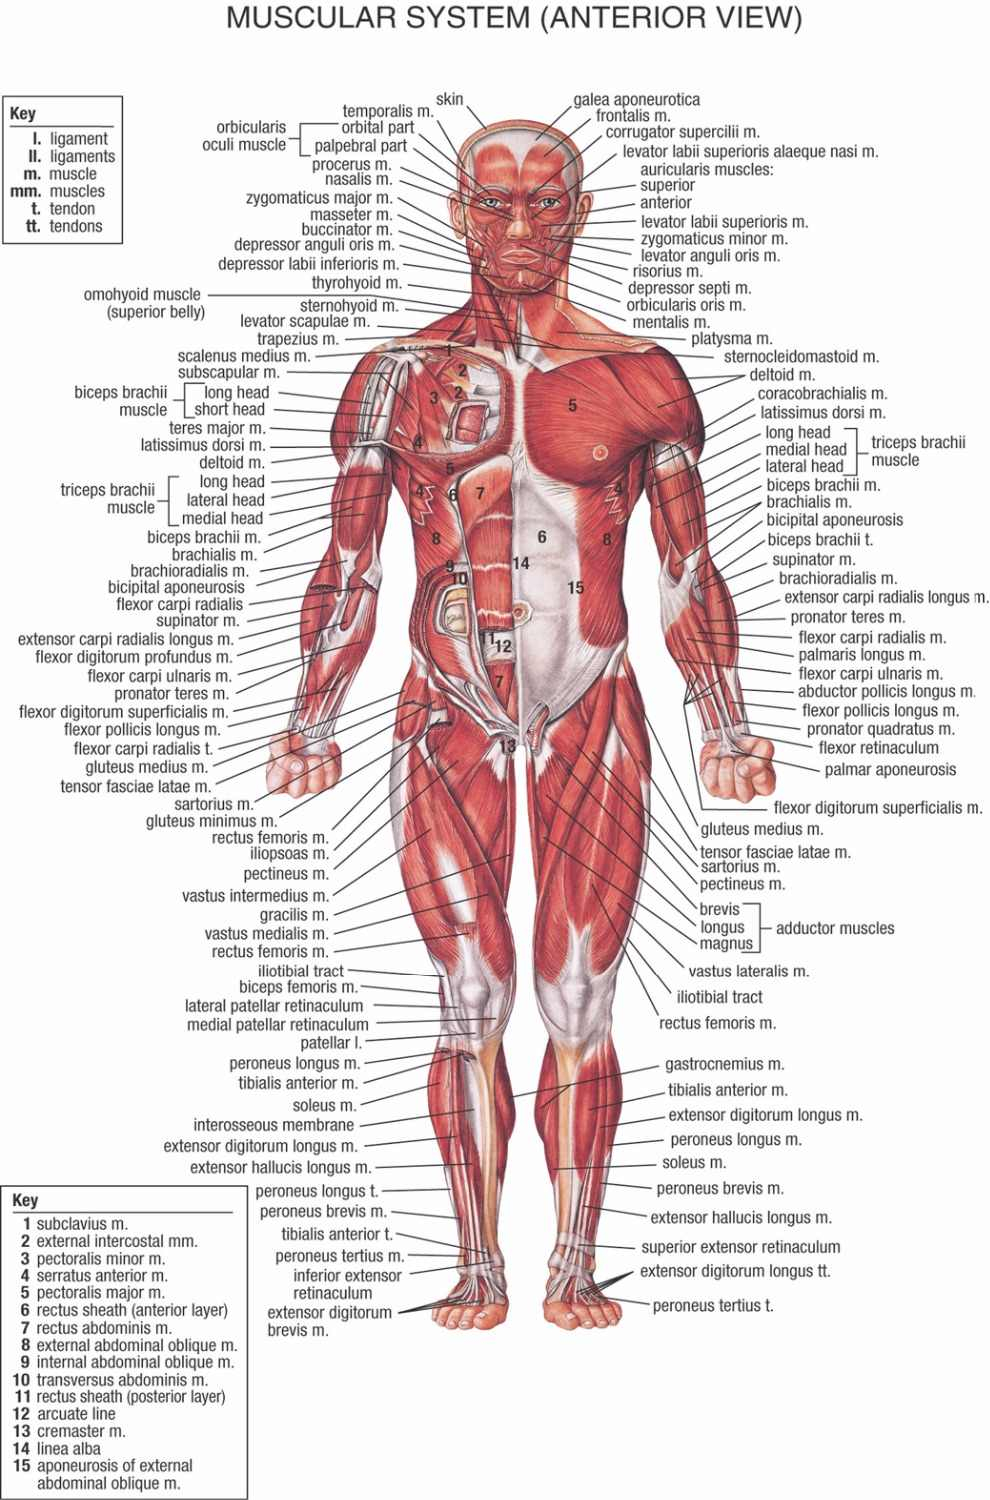 Muscular System Diagram Human Body Anatomical Chart Muscular System Campus Knowledge Biology Classroom Wall Painting Fabric Poster36x24 20x13 03